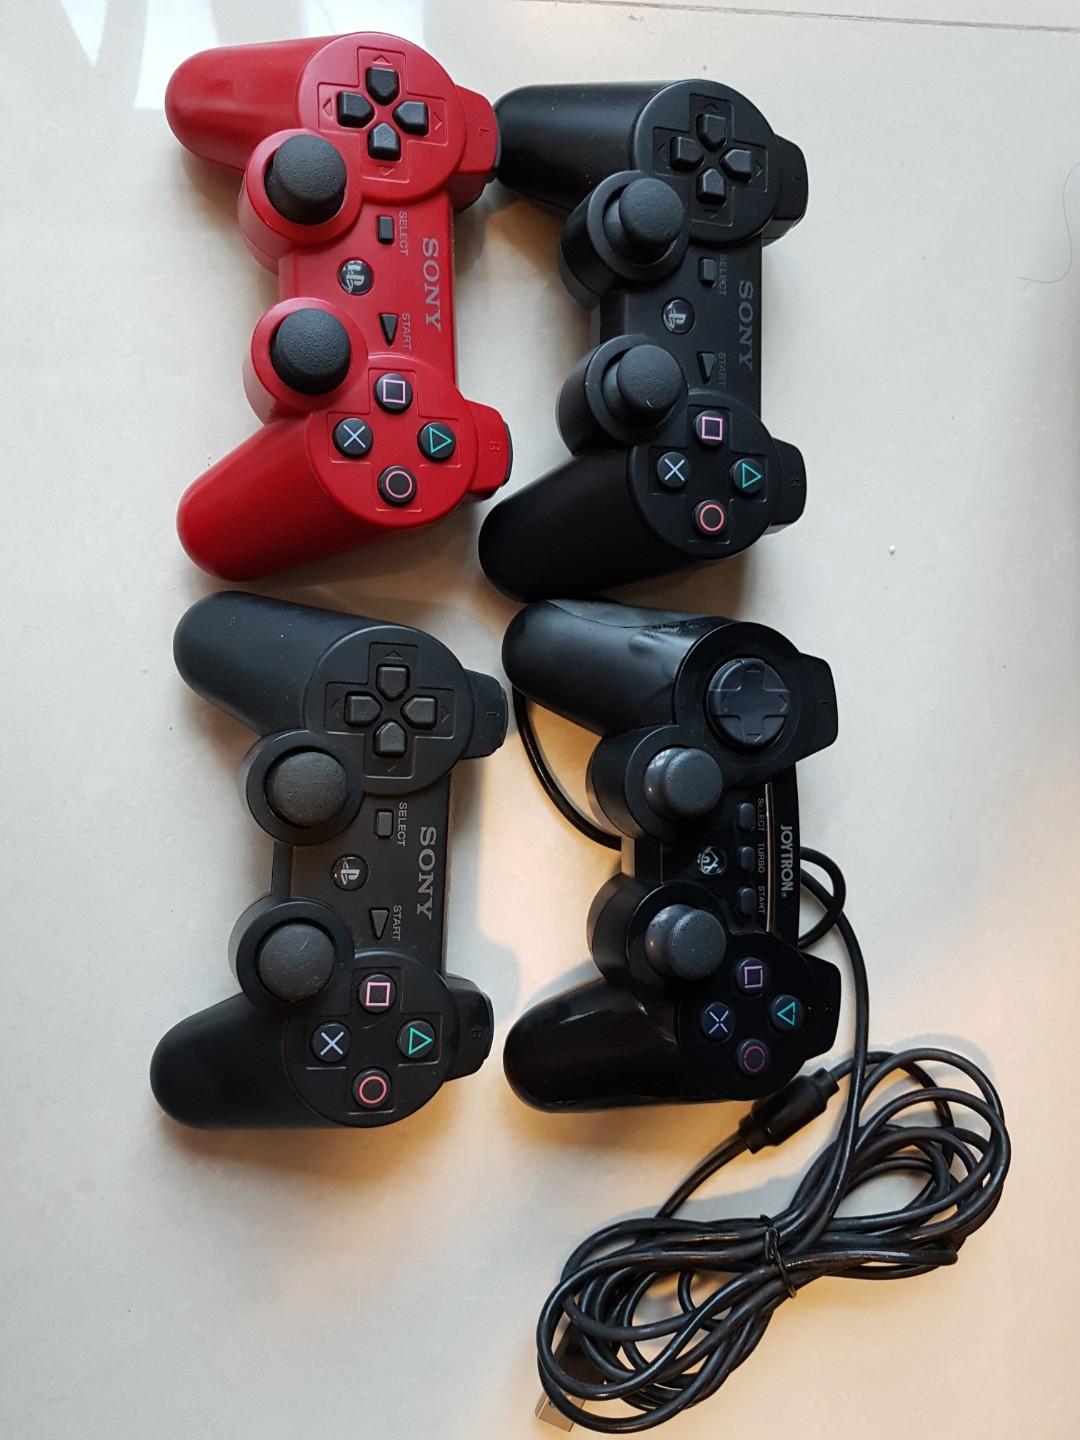 ps3 remotes for sale